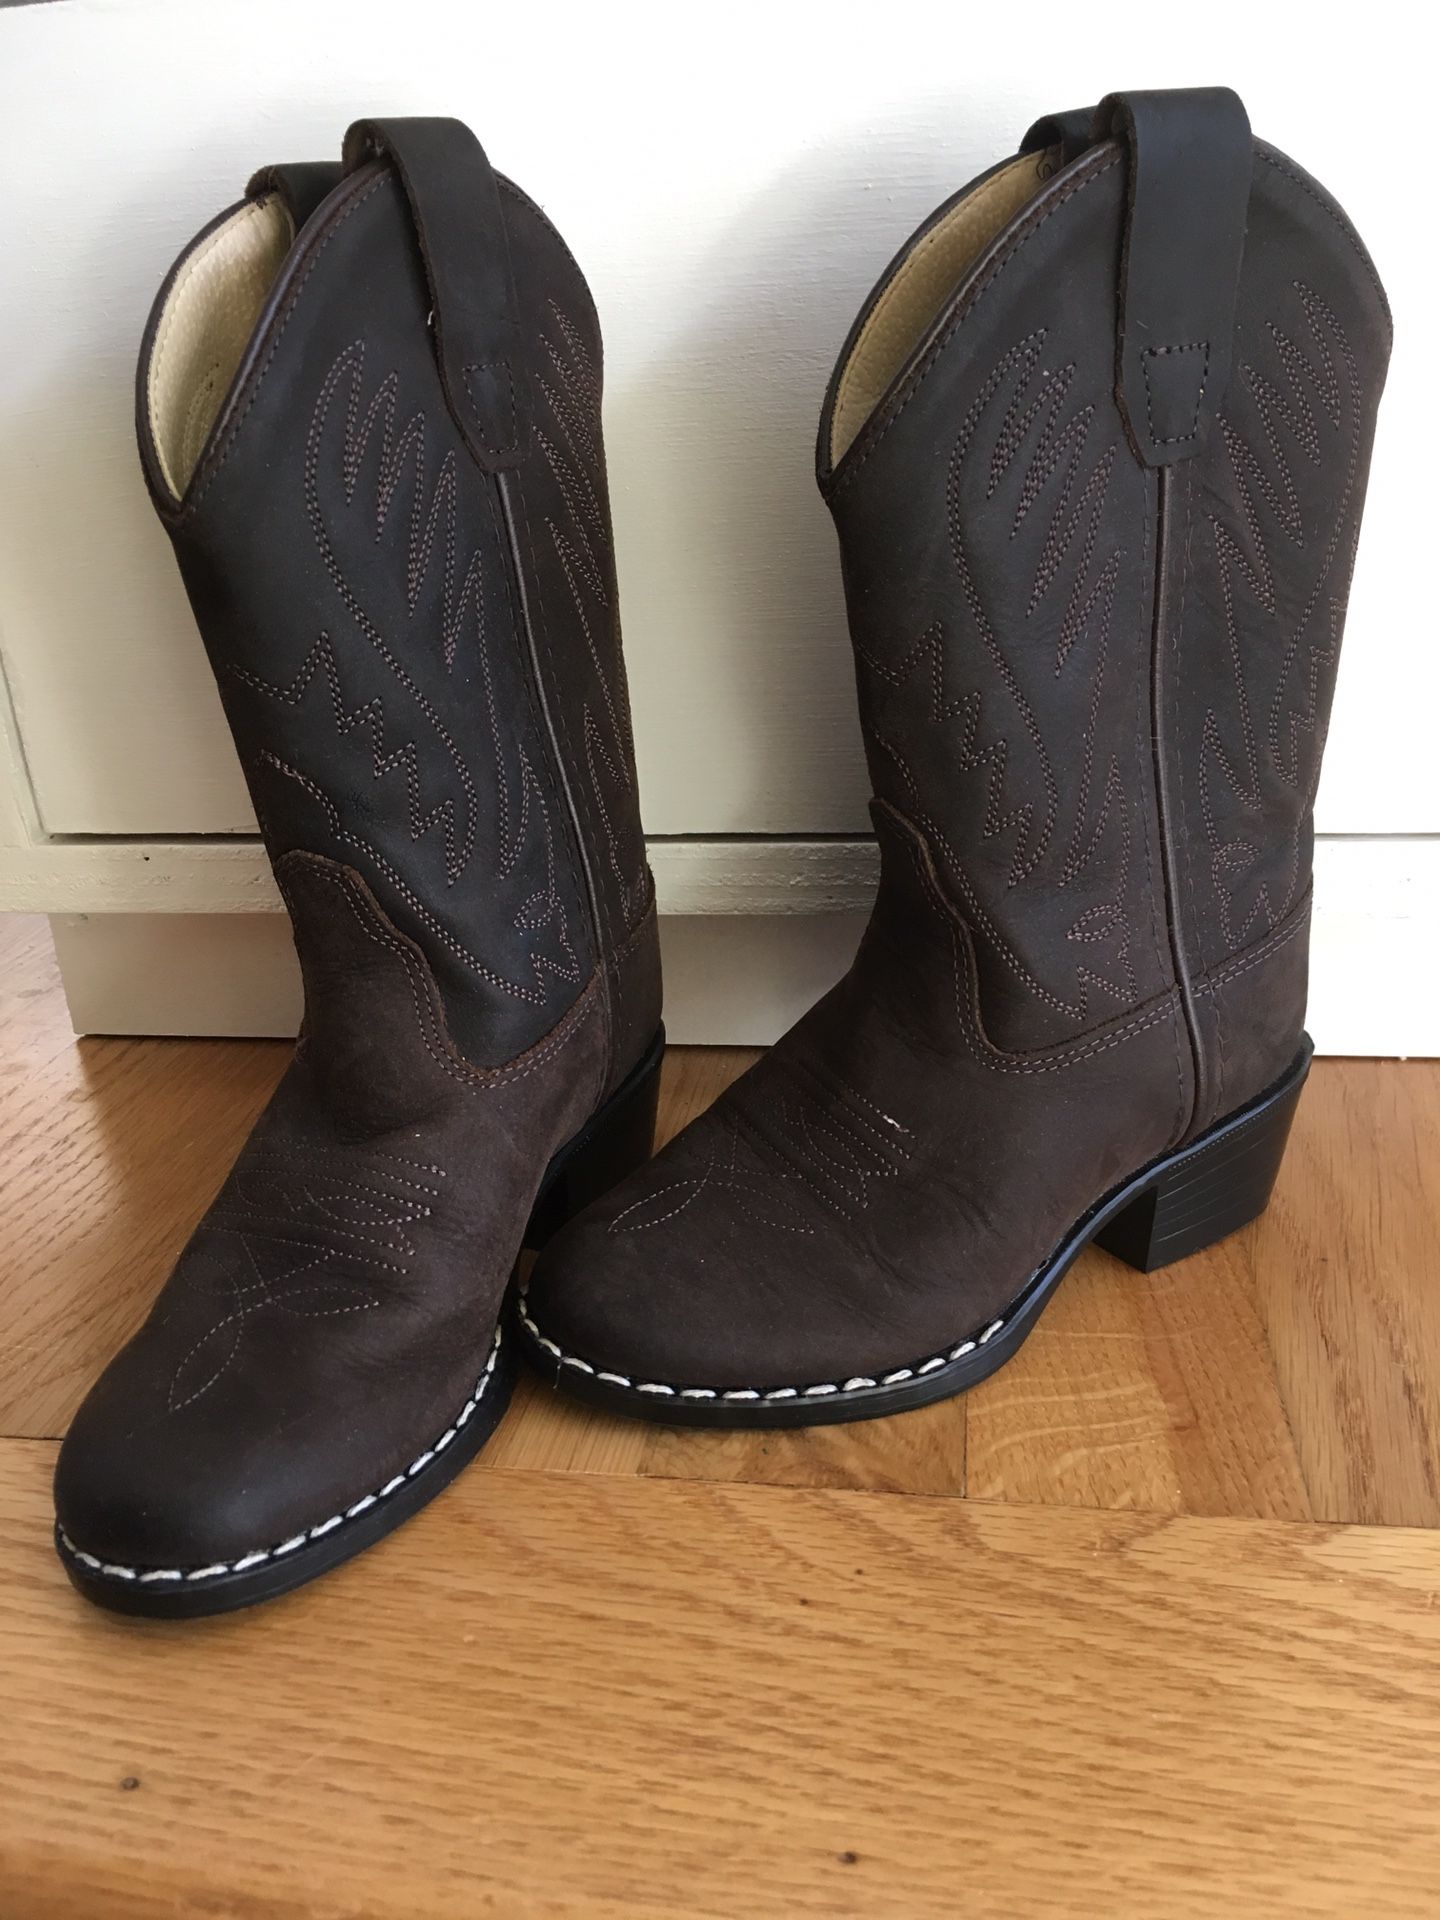 Toddler size 9 Old West leather cowboy boots, new